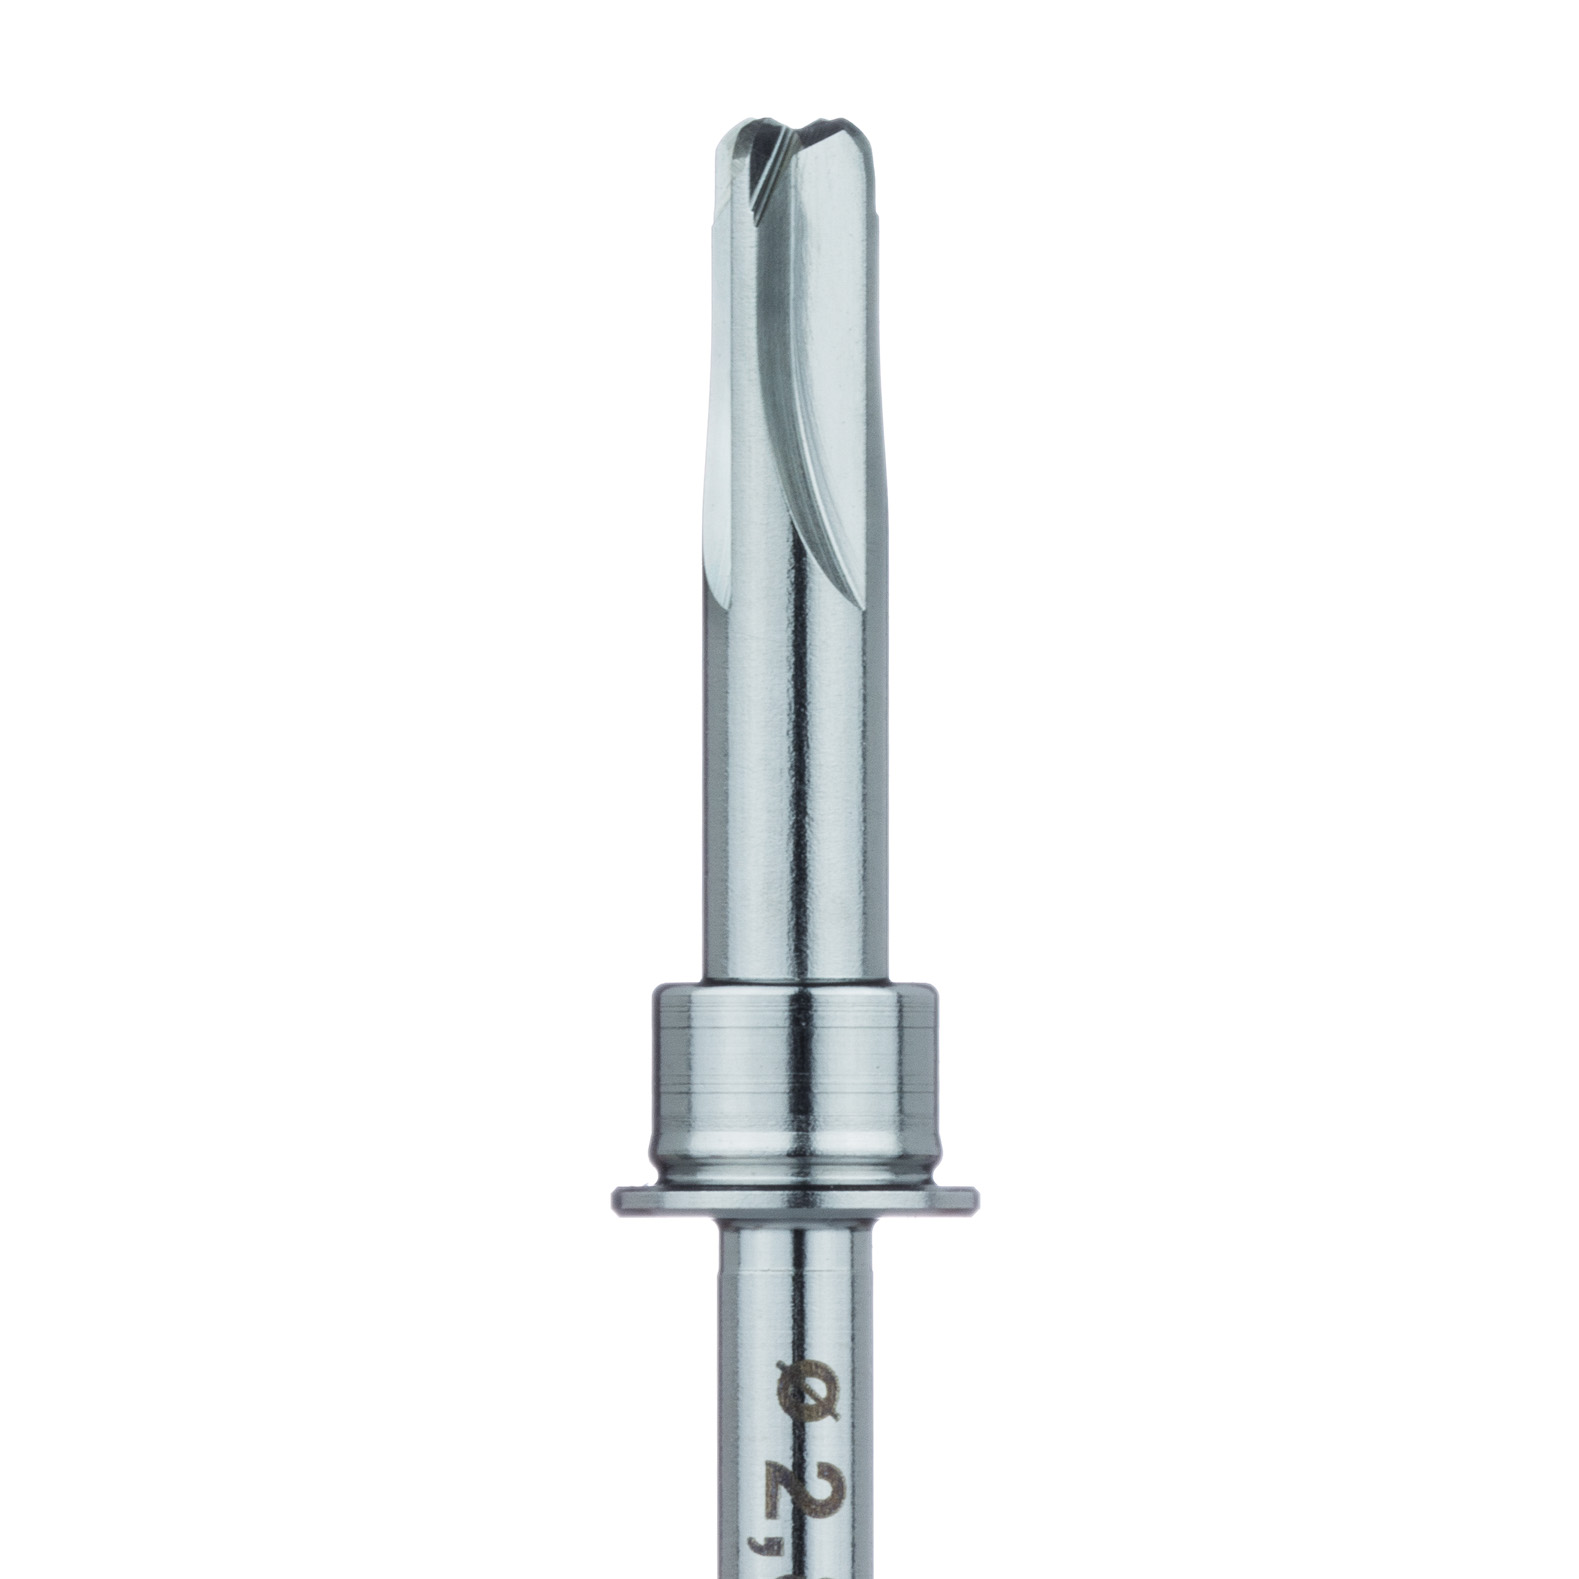 CL002 Surgery, Crestal Drill with stop, 2.8mm RAXL